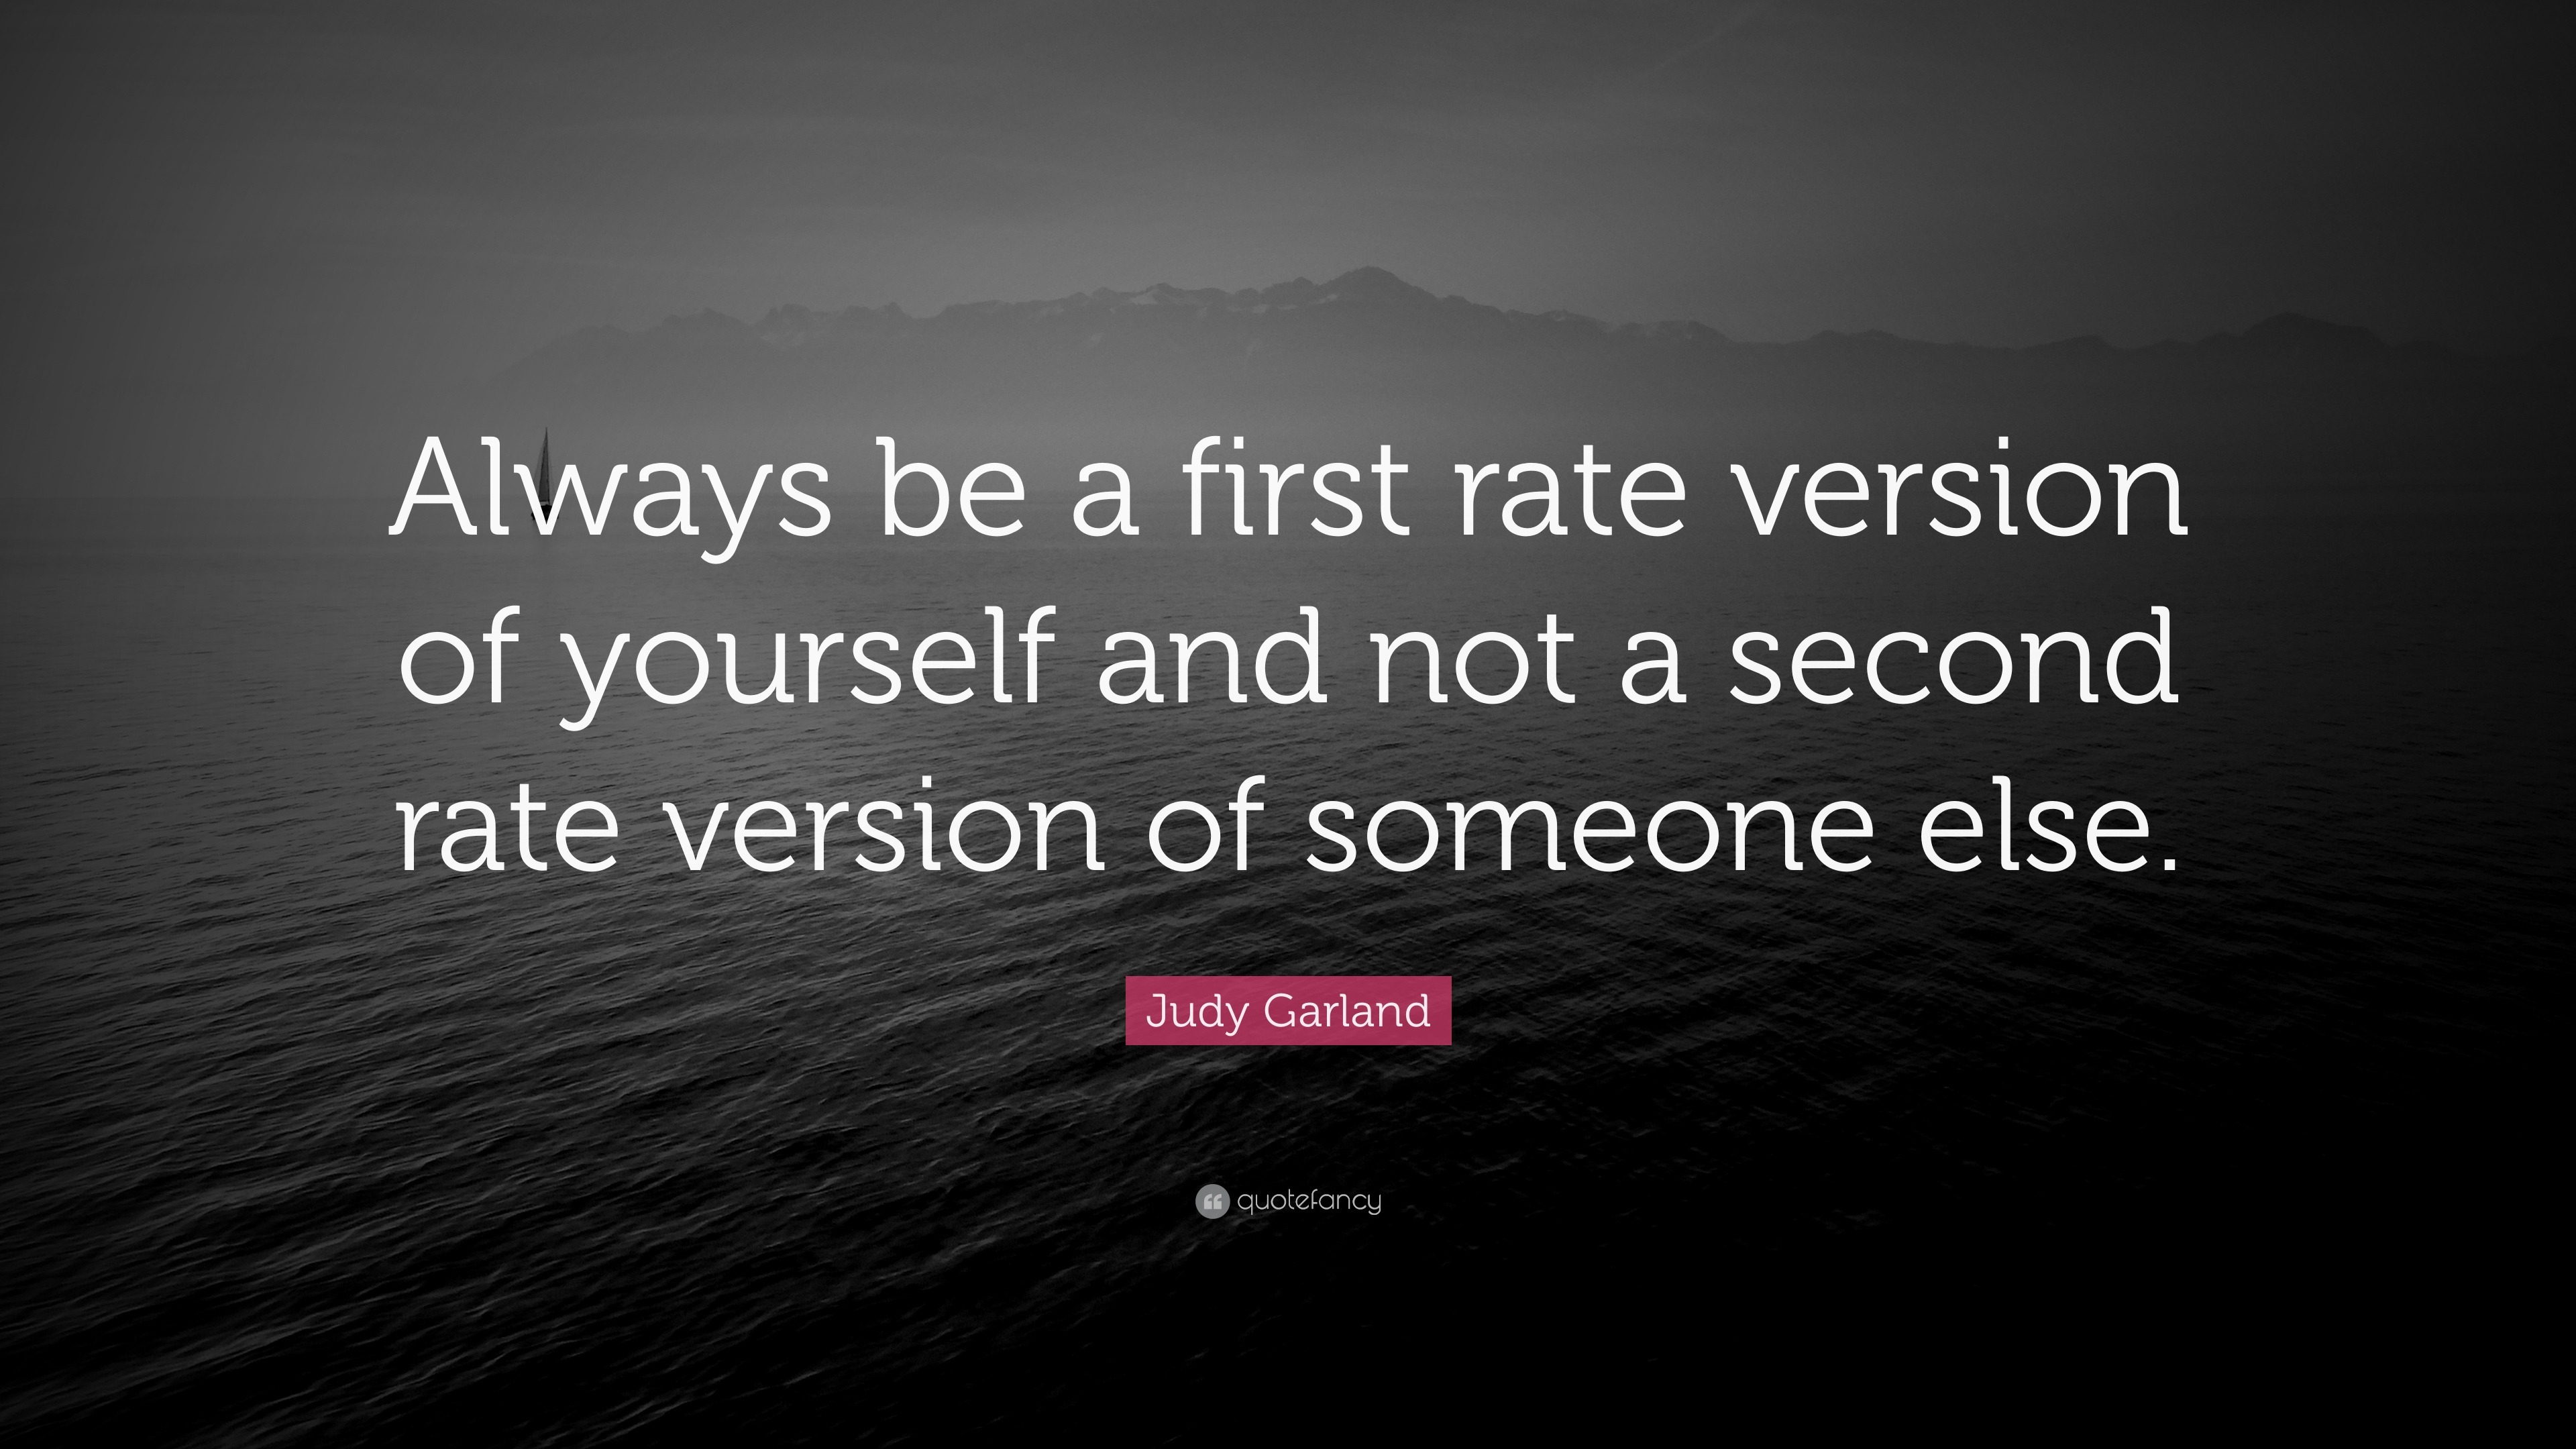 Judy Garland Quote “always Be A First Rate Version Of Yourself And Not A Second Rate Version Of